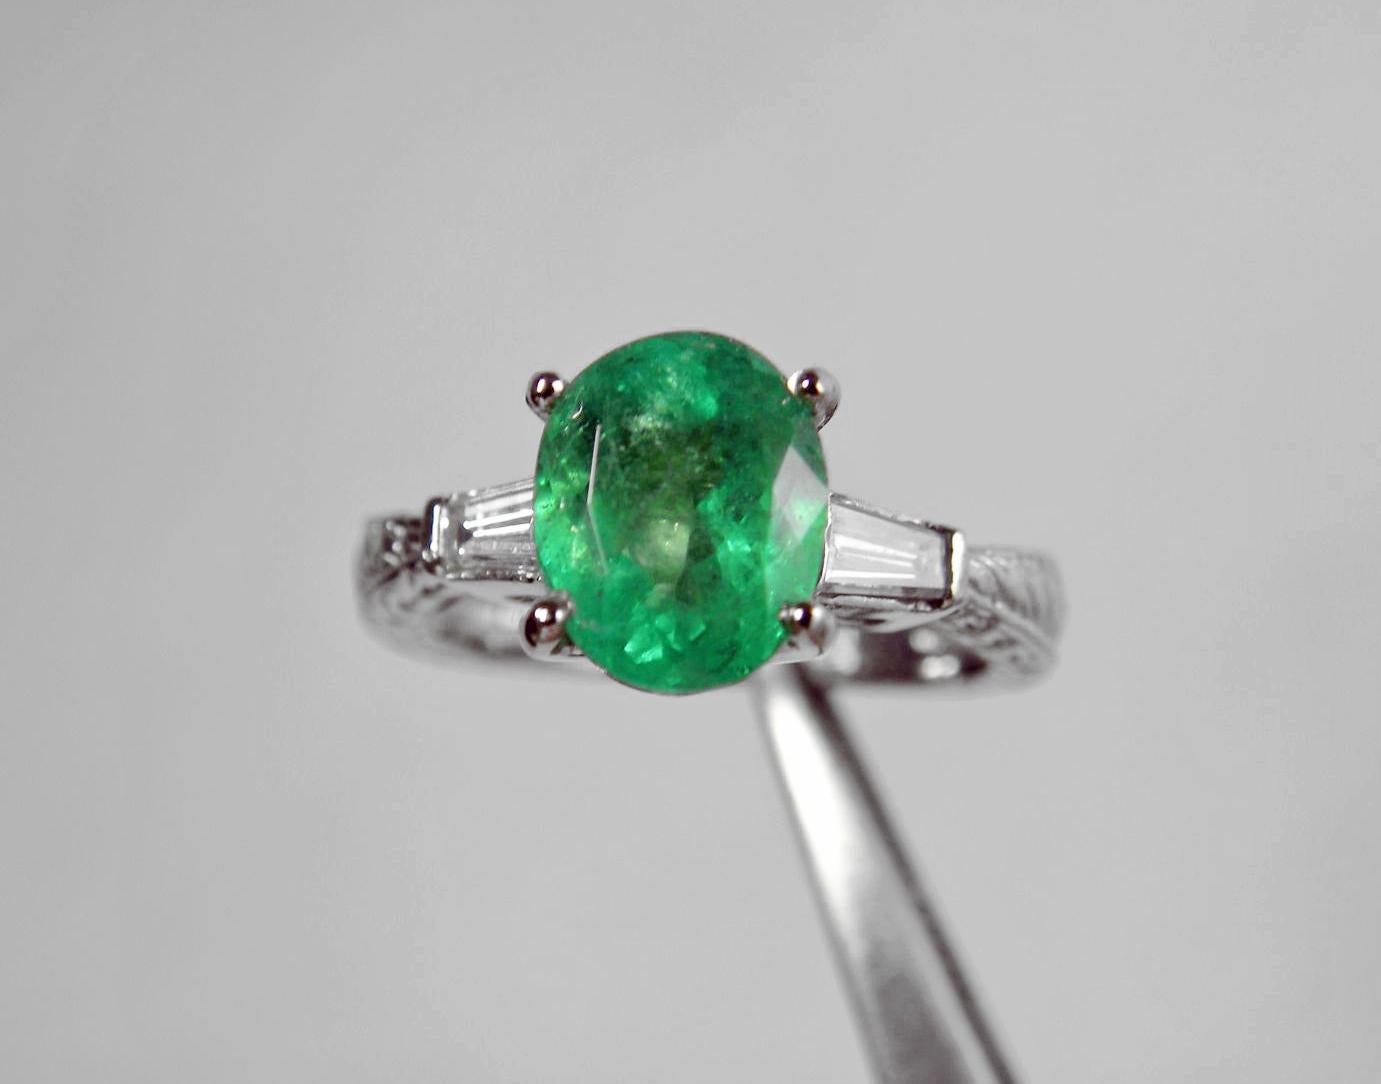 Primary Stone: Natural Colombian Emerald
Shape or Cut: Oval Cut 
Emerald Weight: 1.89 Carats (1 emerald)
Measurements Emerald: 8.92mmx7.12mm
Average Color: Natural Medium Green 
Average Clarity: VS 
Accent Stones: Genuine Diamond
Shape or Cut